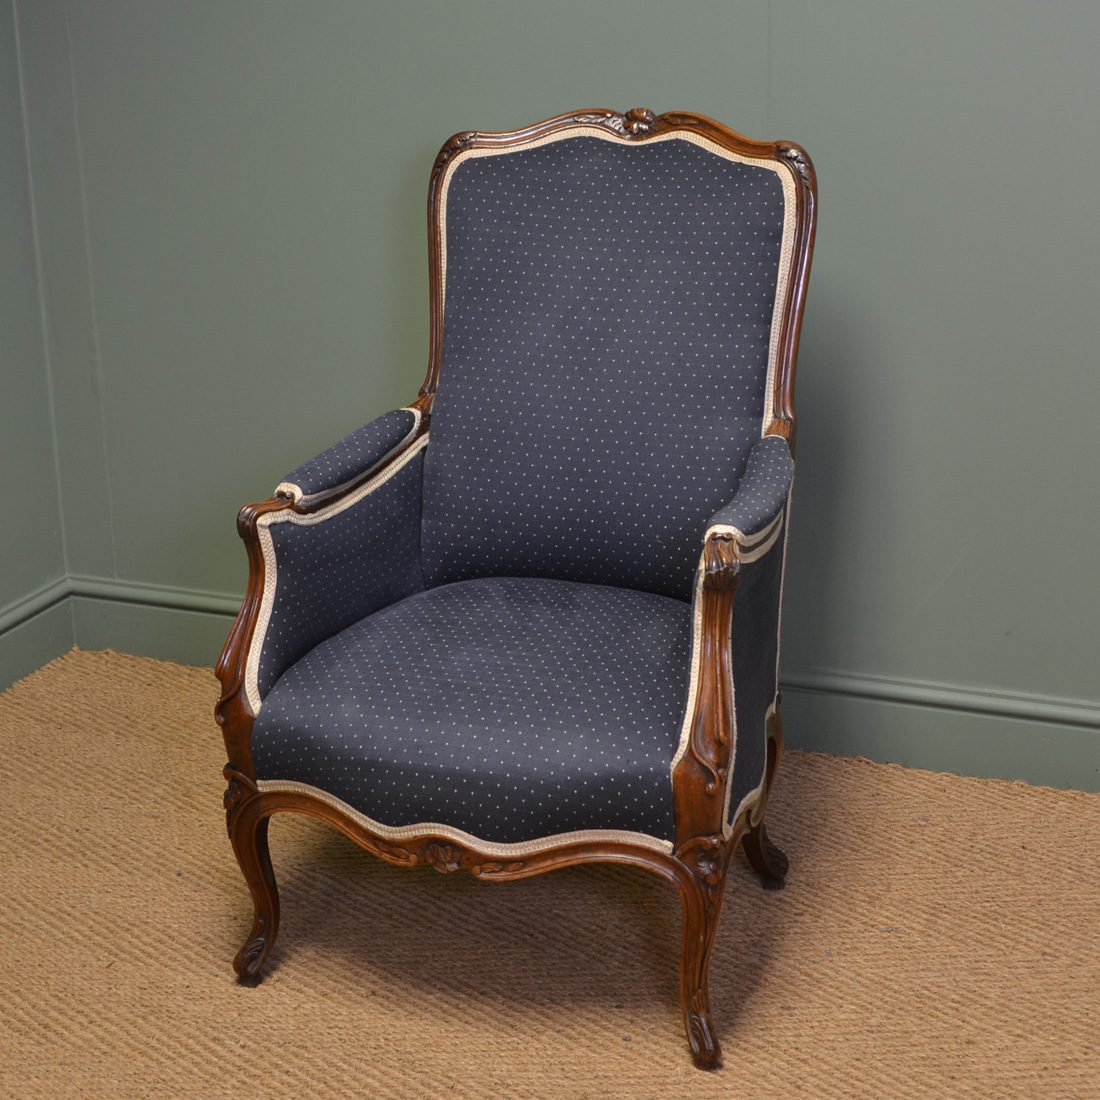 Stunning Antique French Upholstered Walnut Armchair